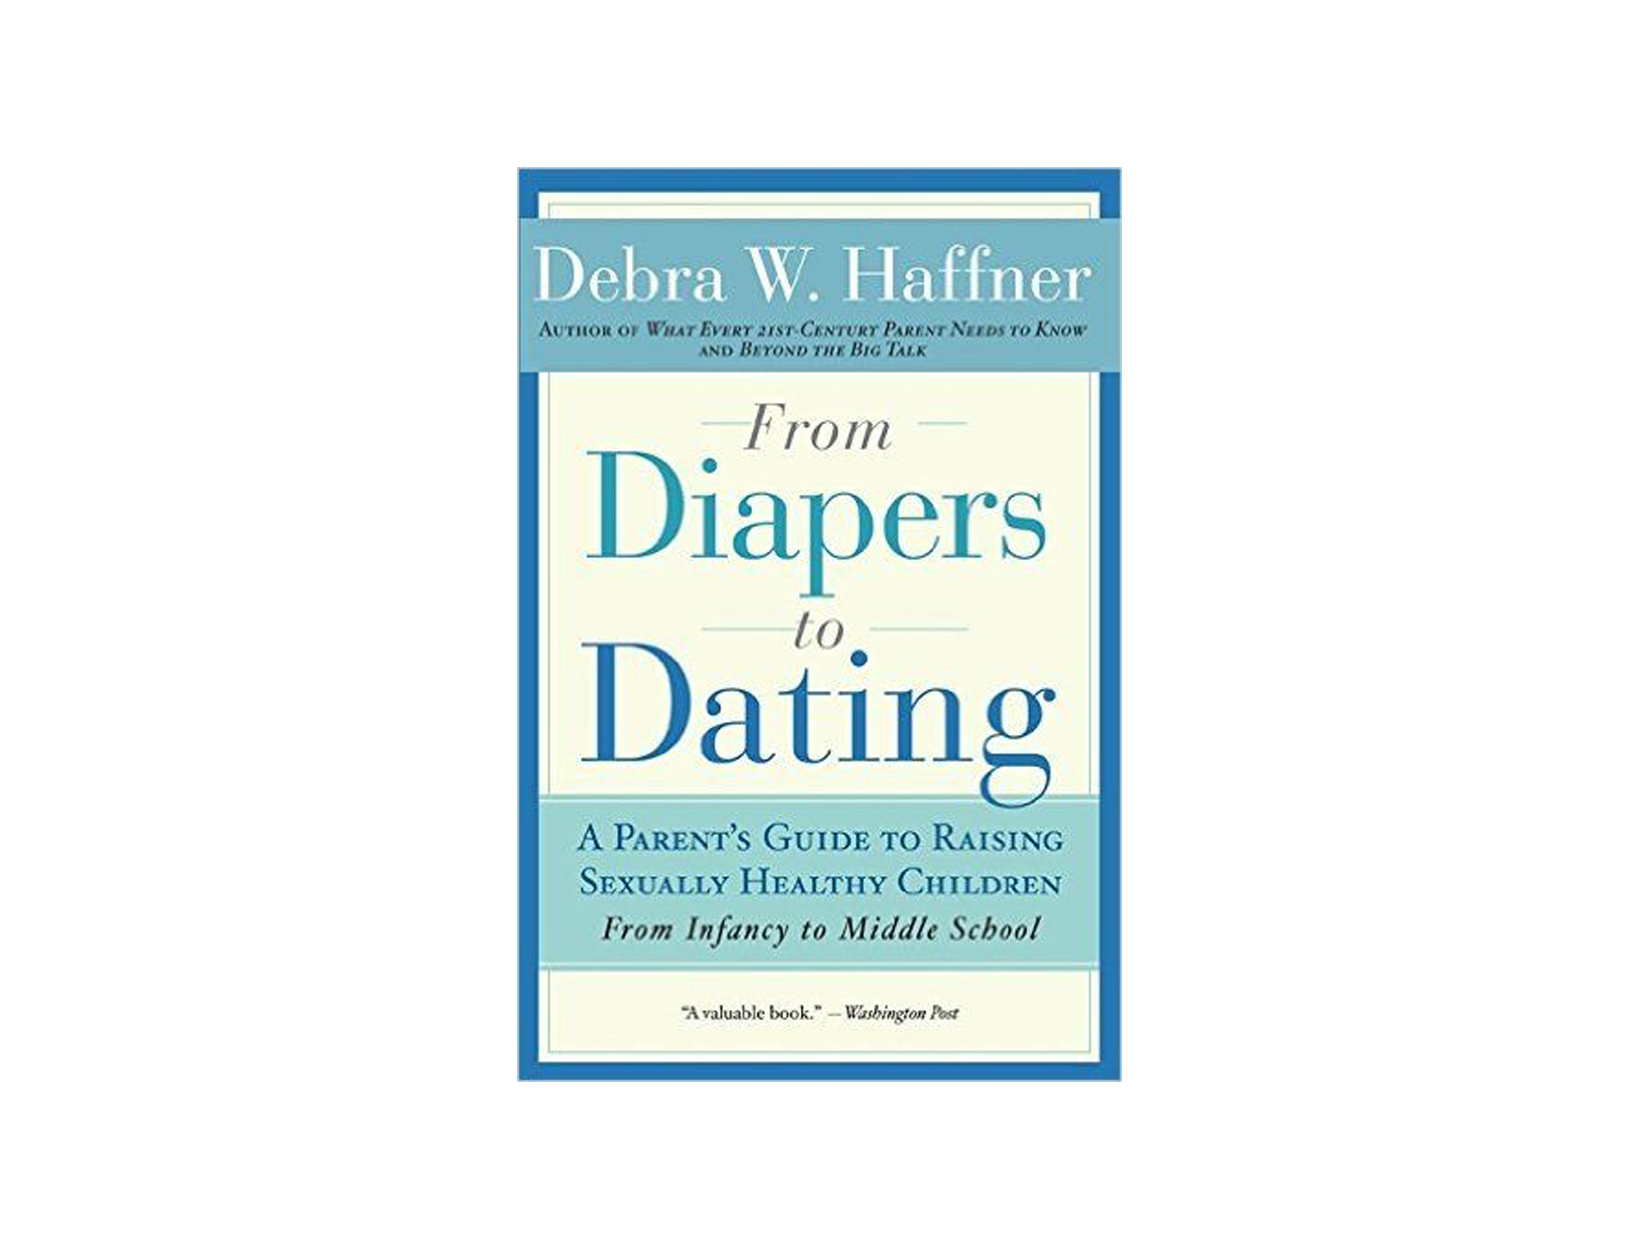 From Diapers to Dating by Debra W. Haffner